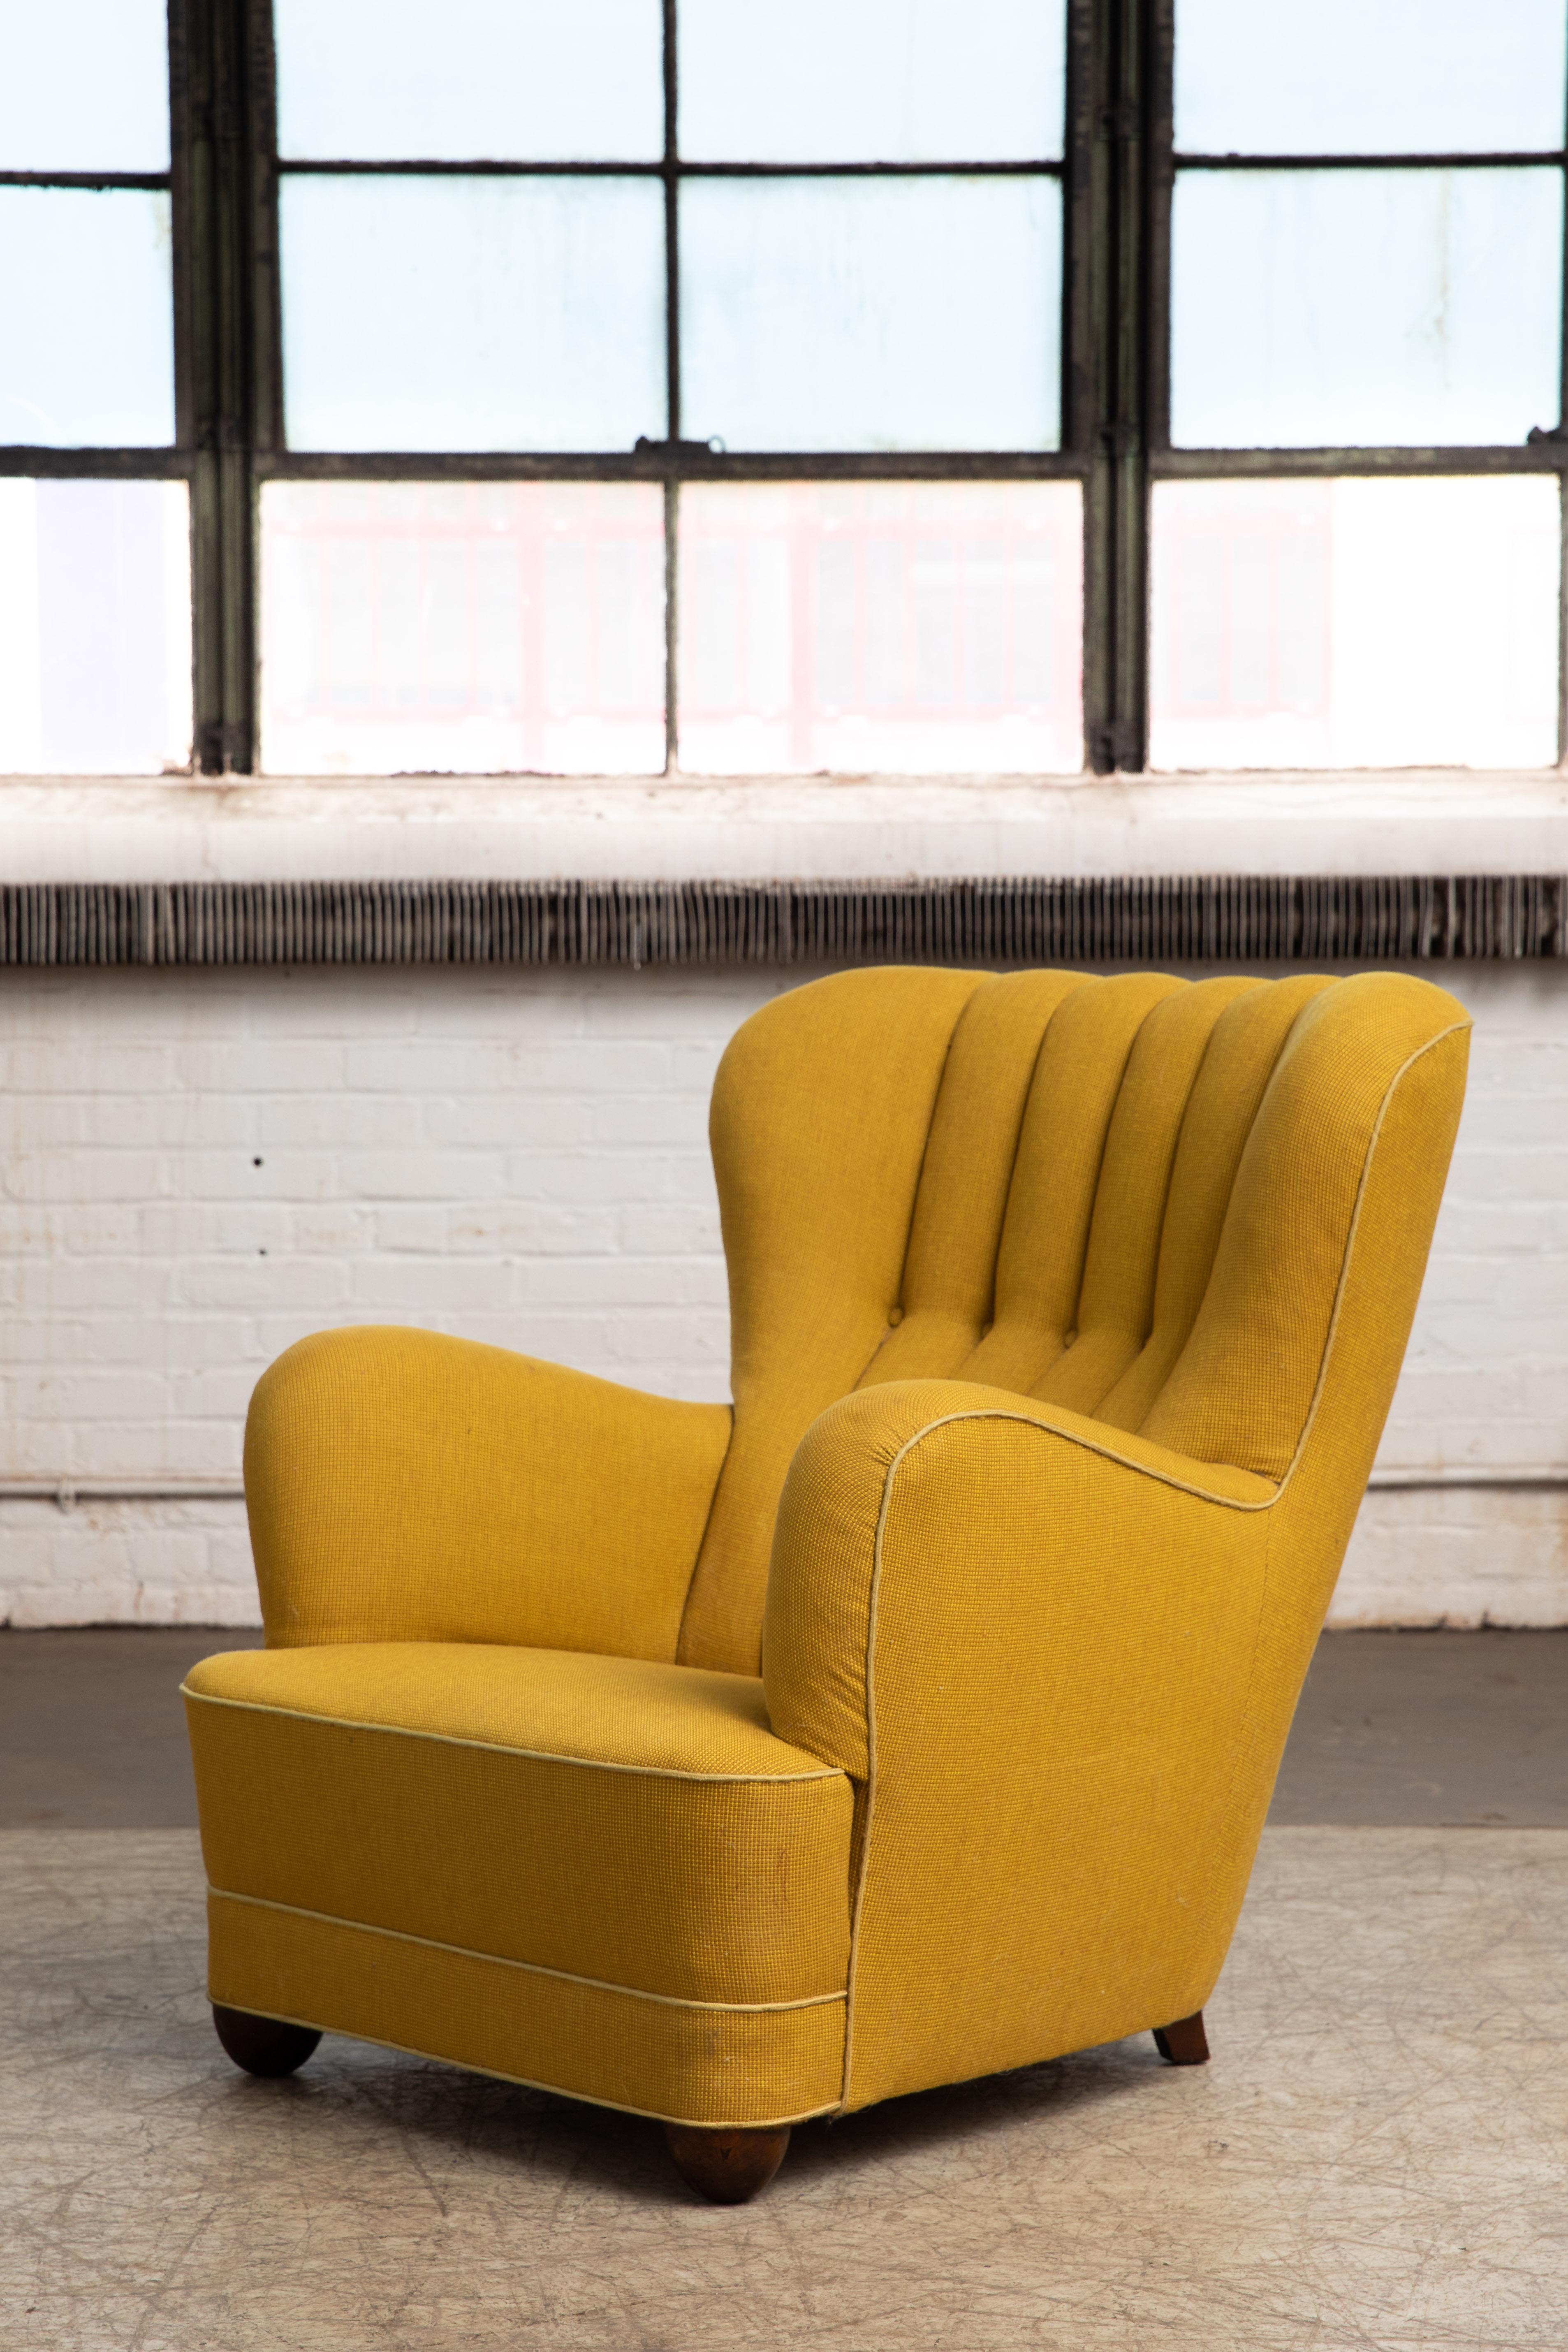 Sublime highback lounge chair with channeled back made in Denmark in the late 1930s or early 1940s. This model chair is seen from time to time in the Danish market and is often attributed to Fritz Hansen, but unfortunately the Fritz Hansen